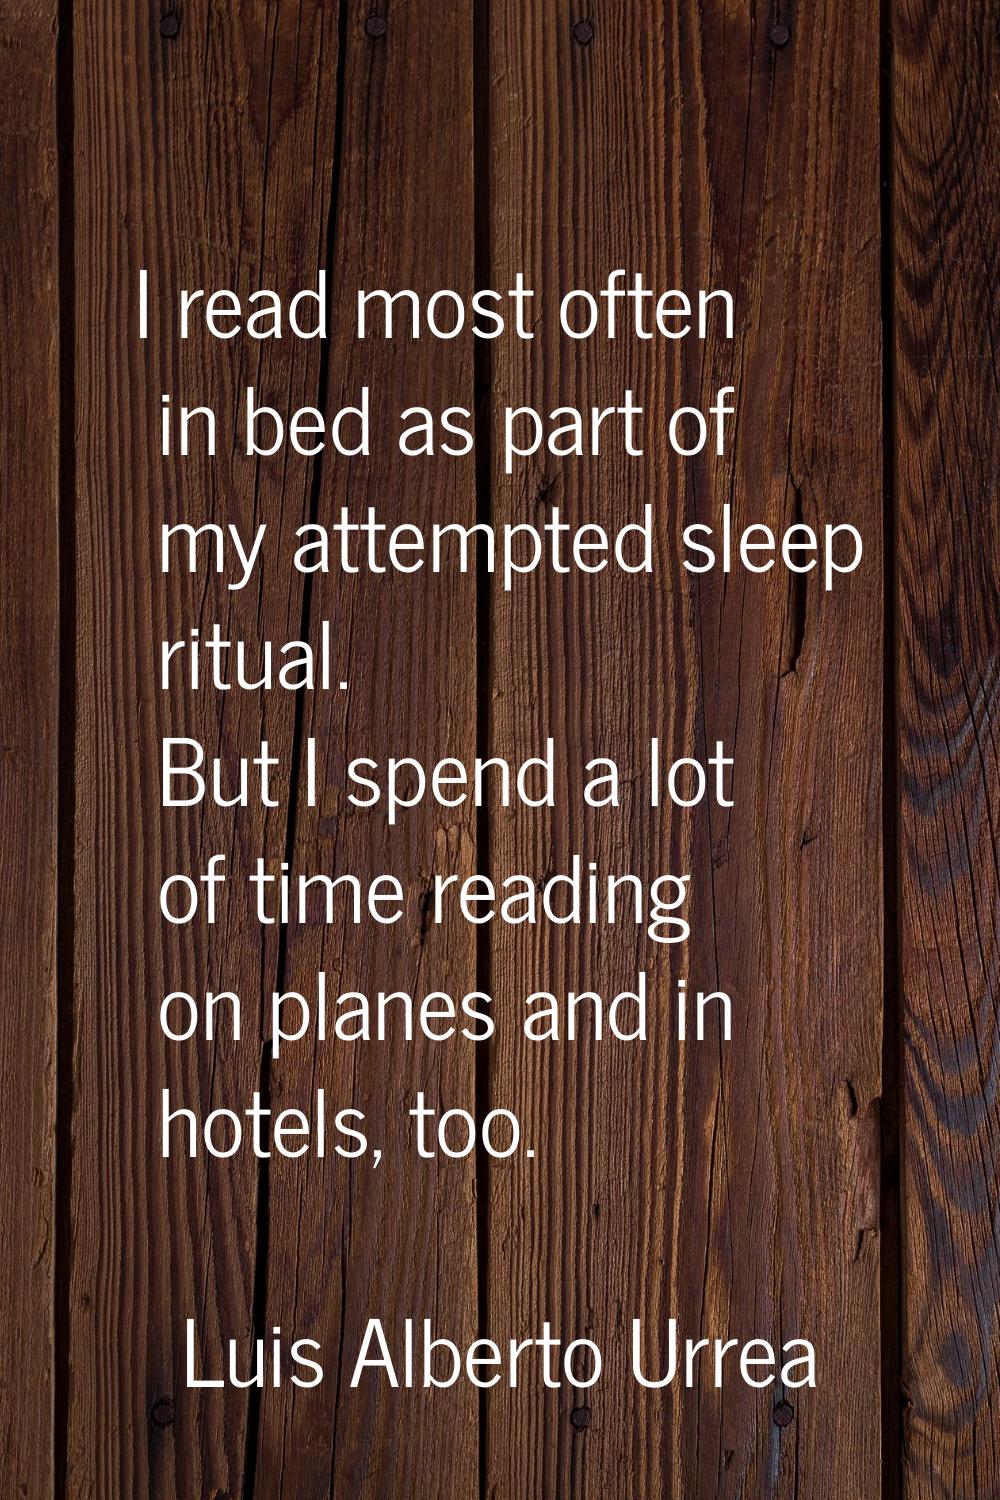 I read most often in bed as part of my attempted sleep ritual. But I spend a lot of time reading on